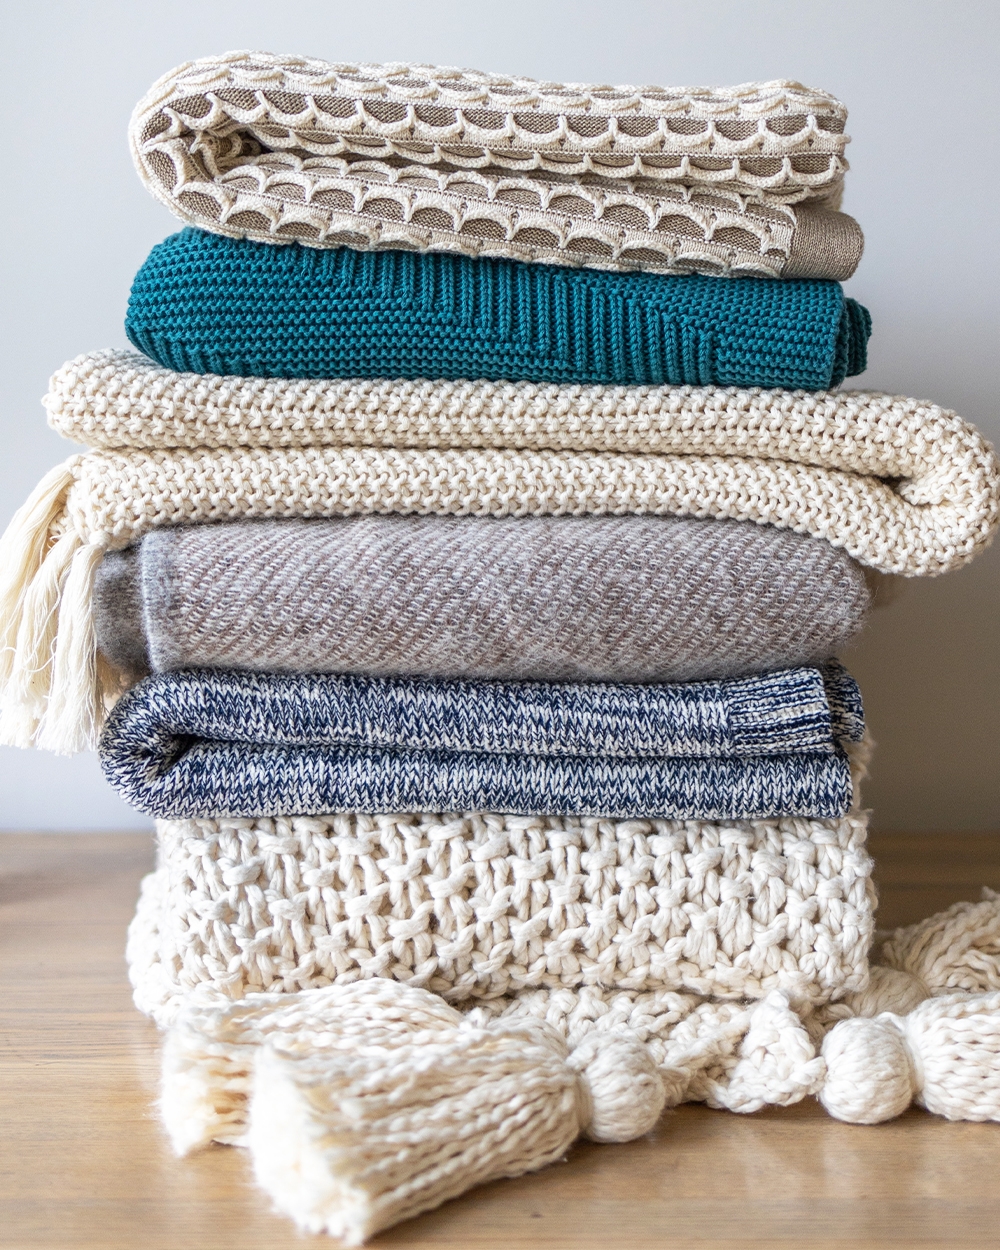 Stack of knit blankets in a variety of weights in beige, grey, and blue hues.